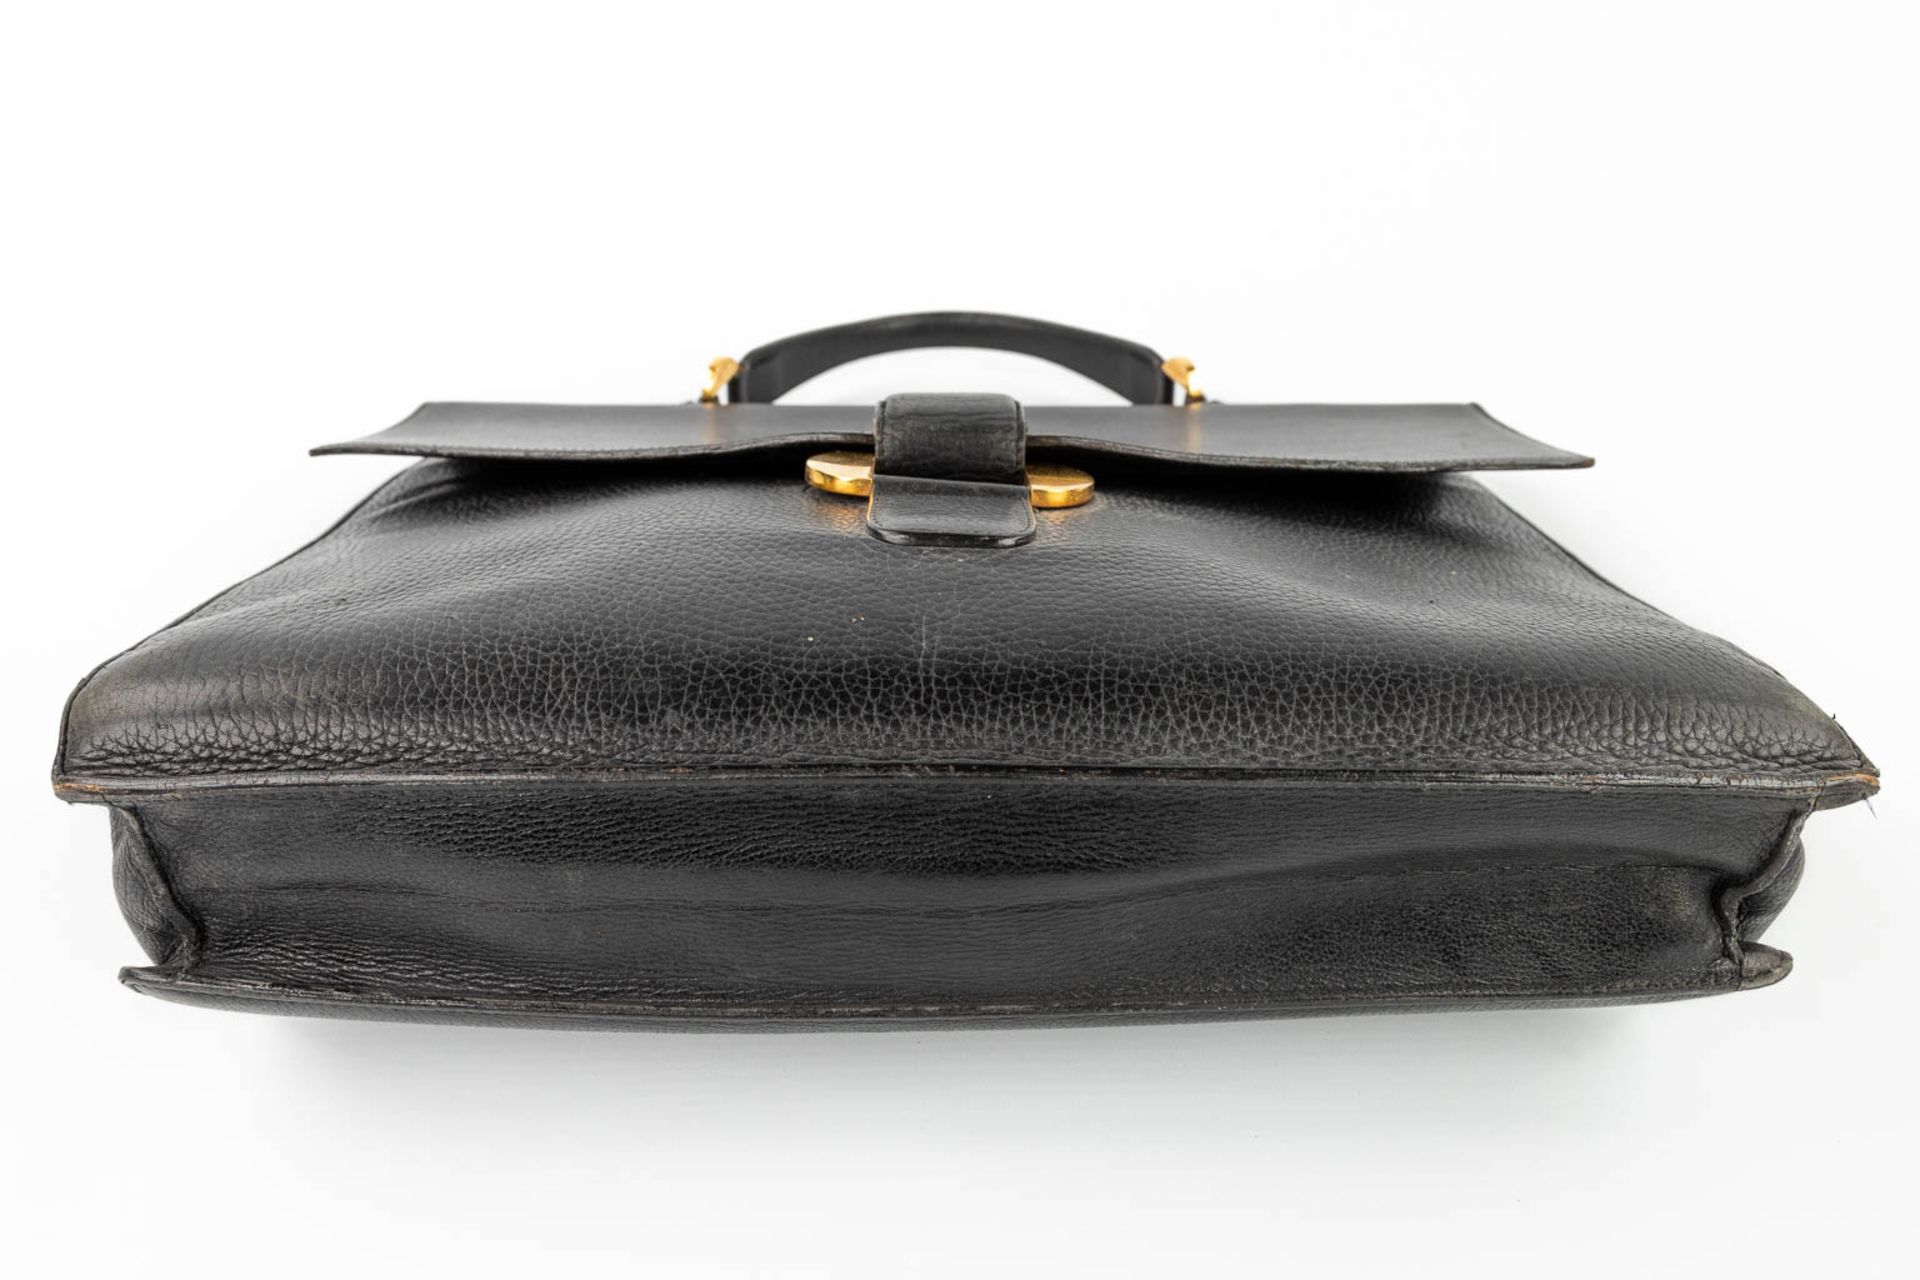 Delvaux, a suitcase made of black leather with gold-plated elements. (W:39 x H:33 cm) - Image 7 of 16